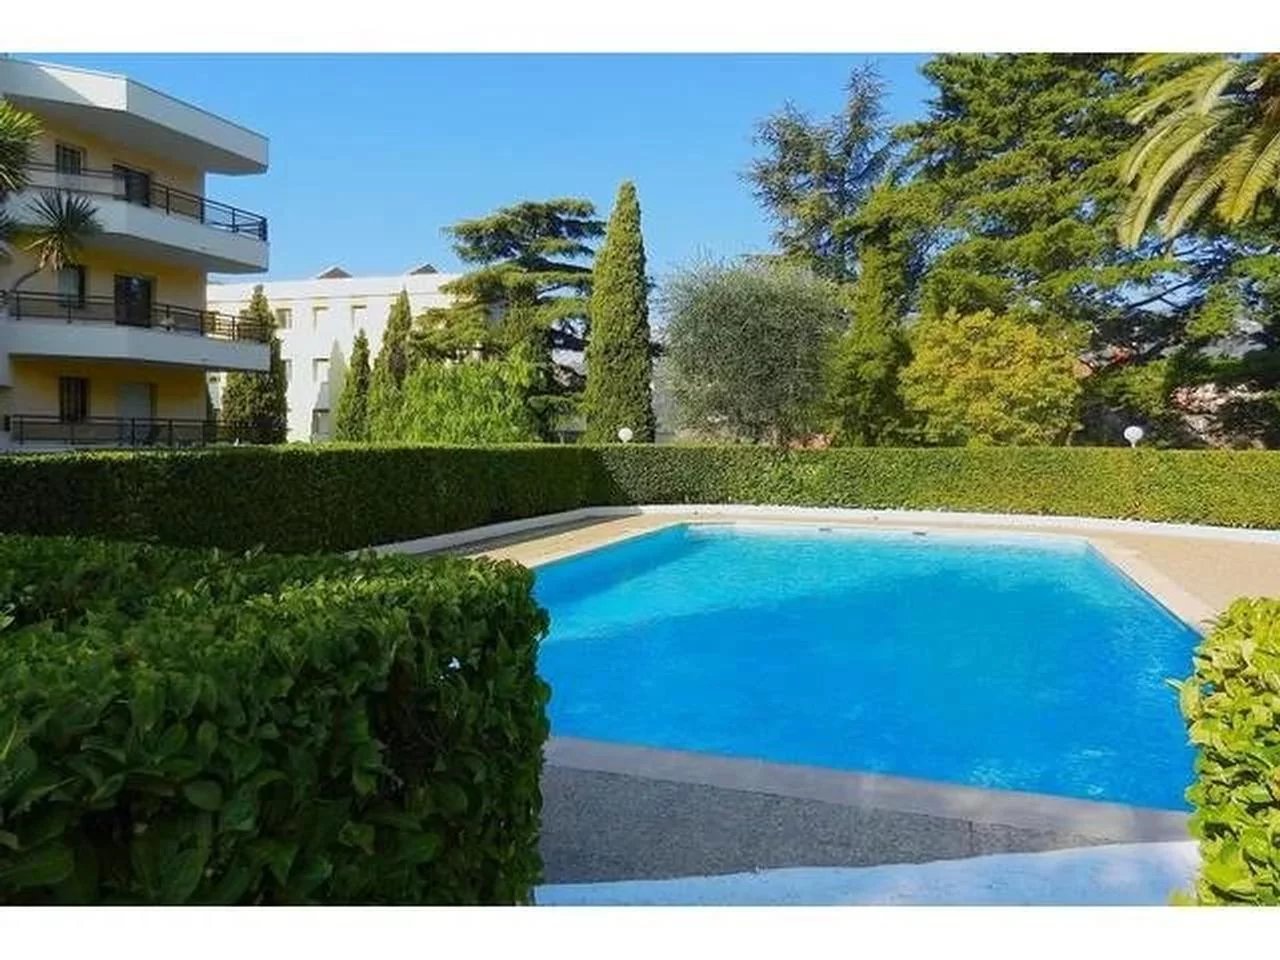 Appartement  3 Rooms 73.17m2  for sale   495 000 €